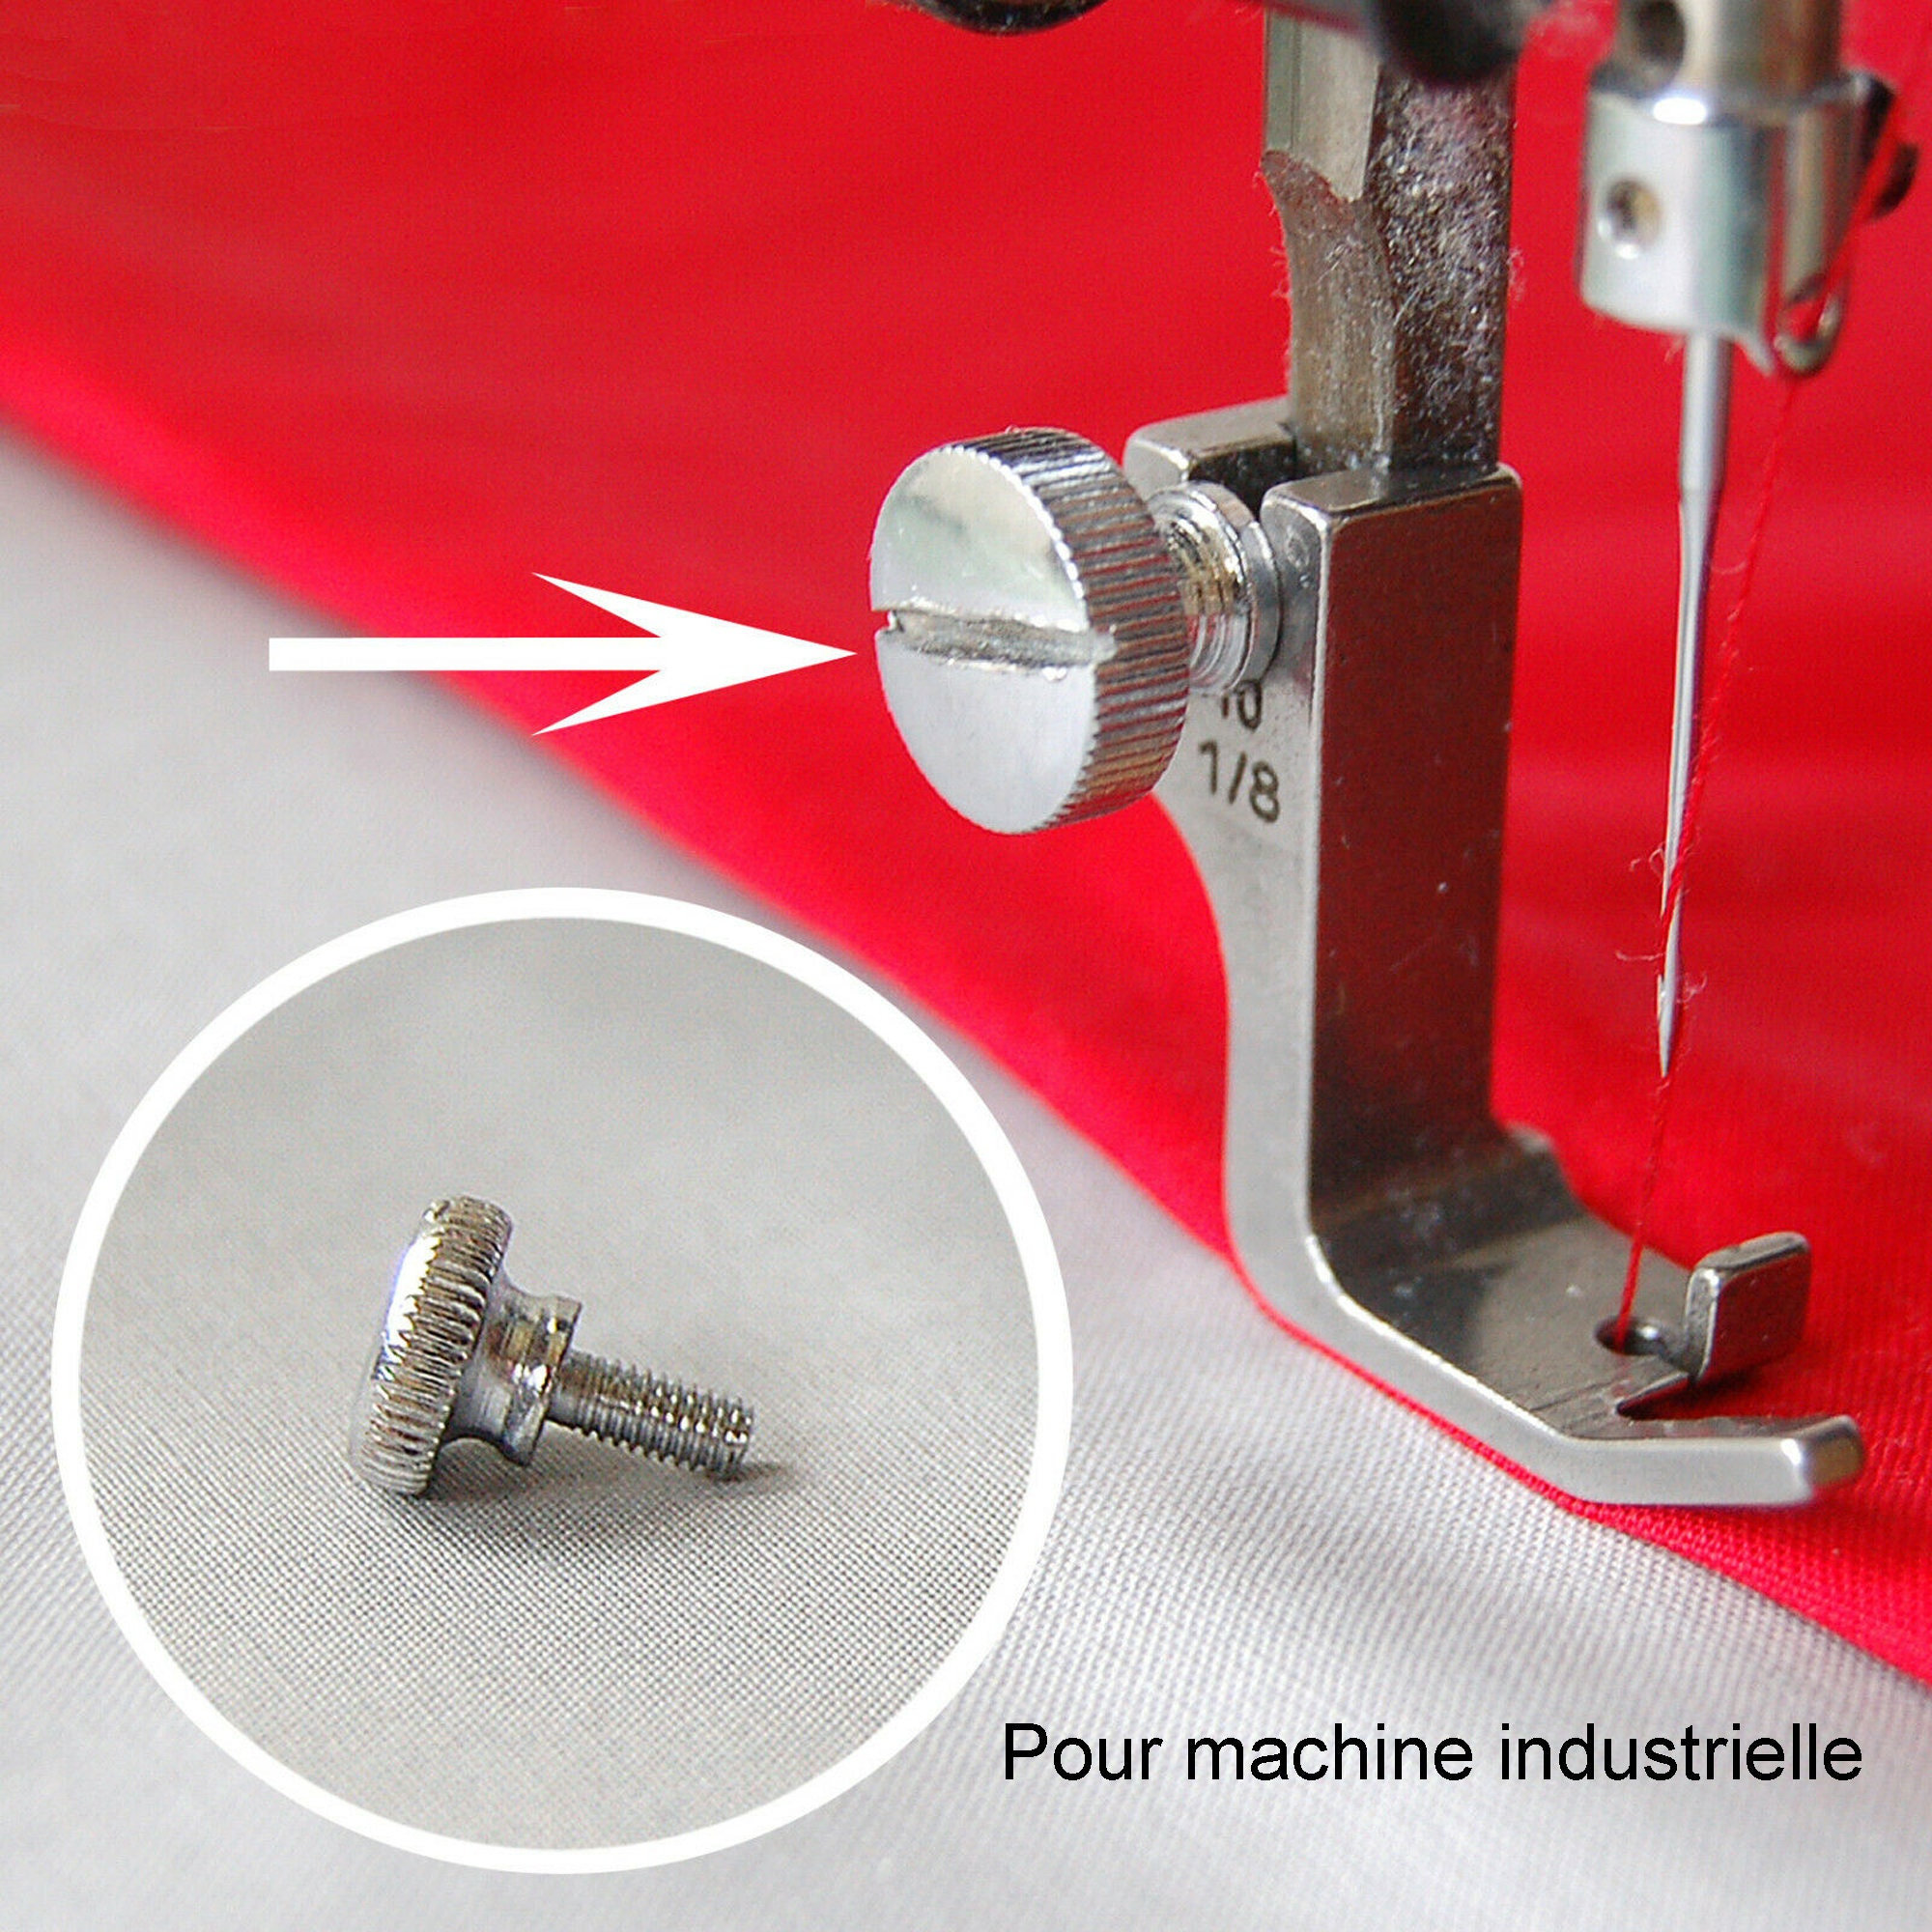 Sewing Machine BOBBINS for House/ Industrial Sewing Machine Spool